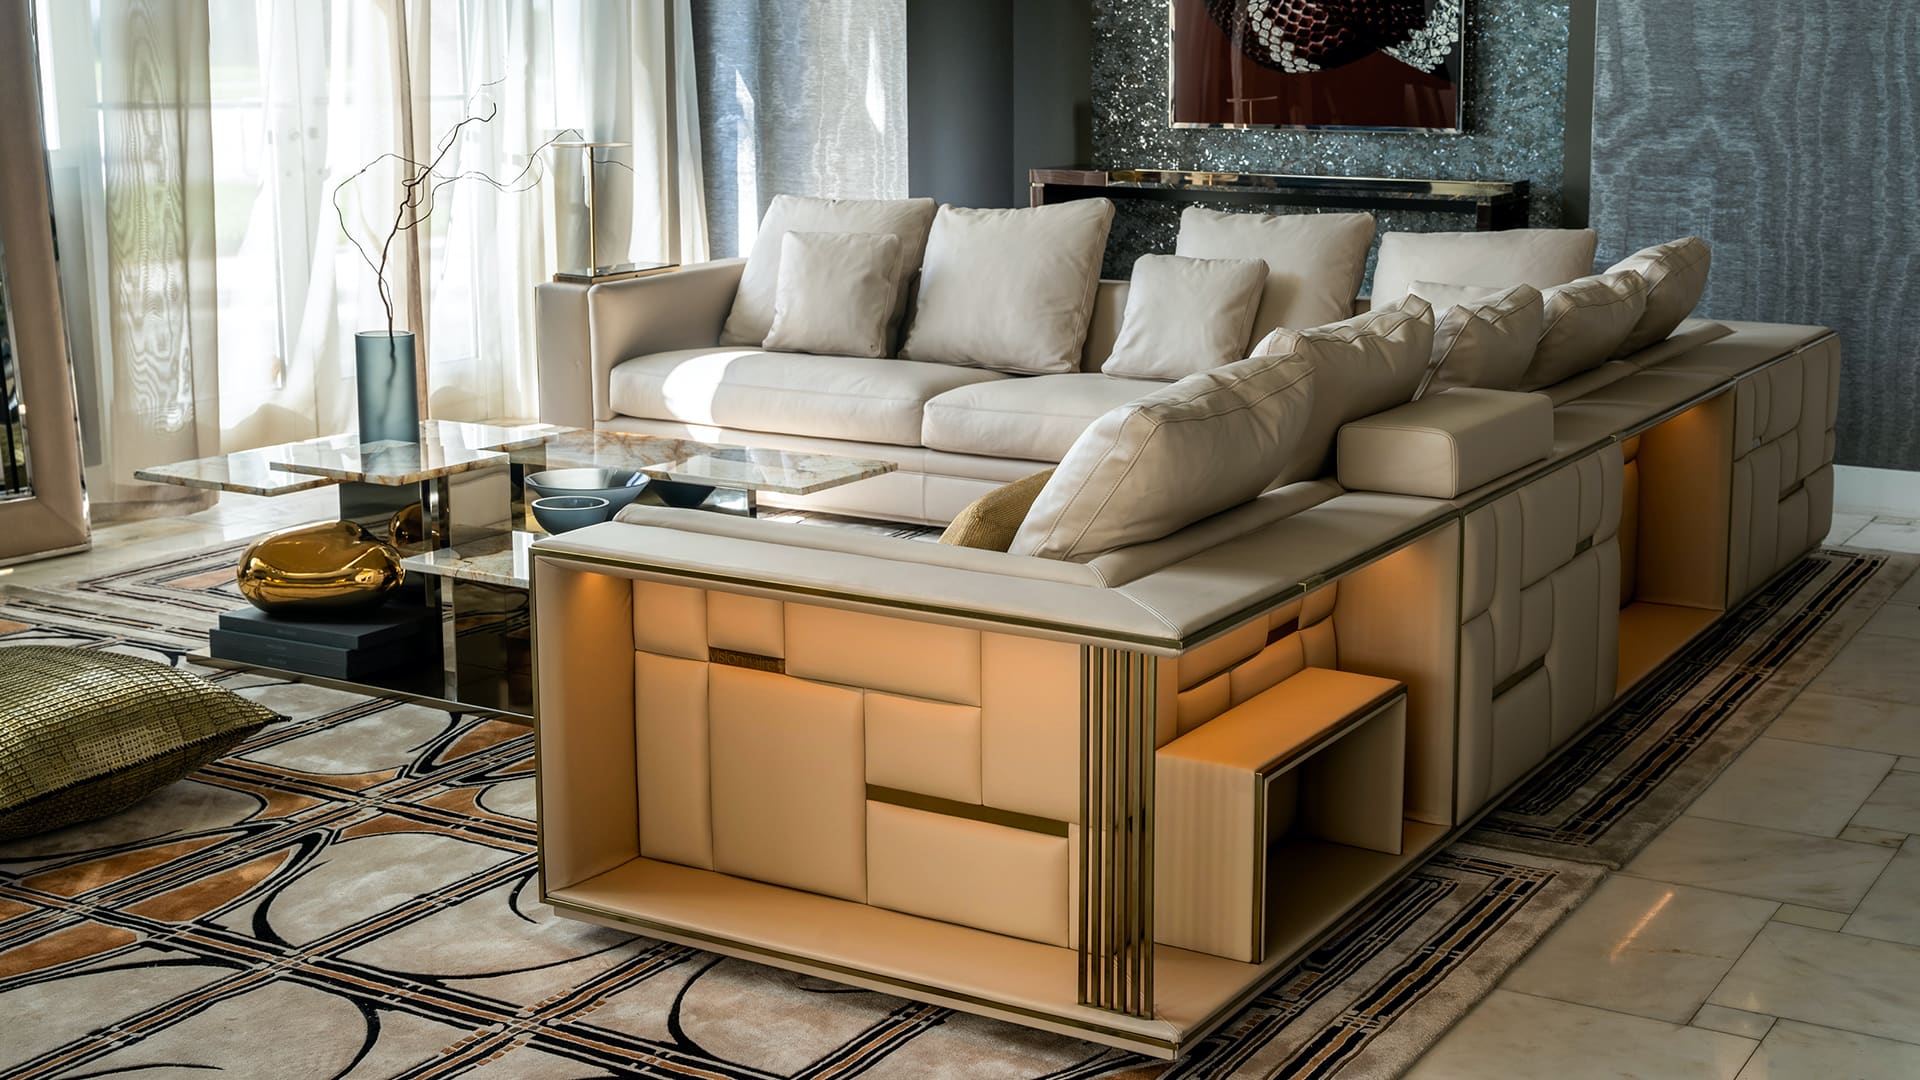 Tips For Buying New Furniture For Your Home